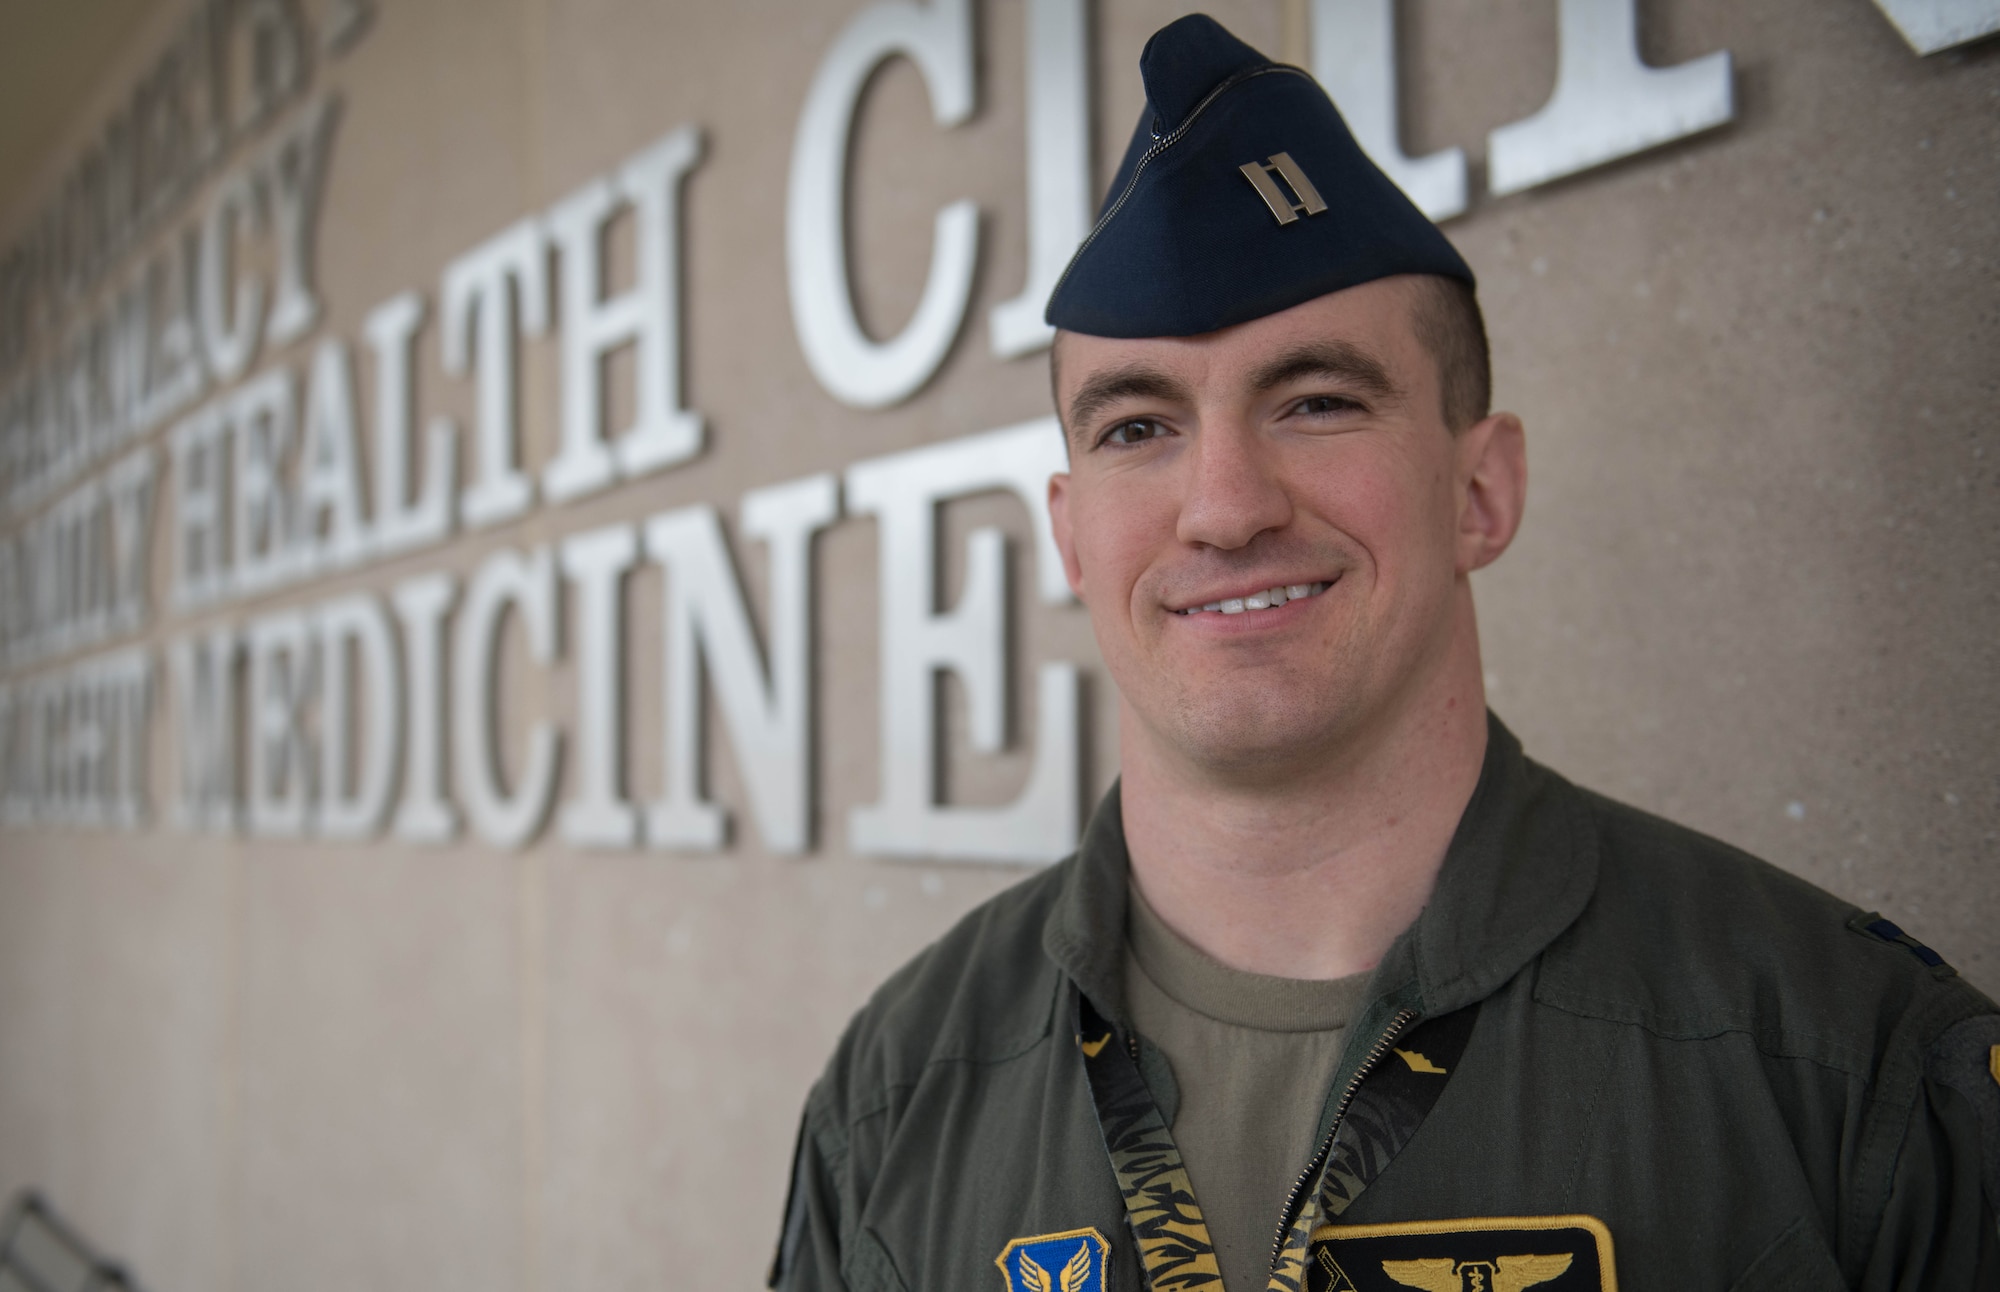 Air Force Capt. (Dr.) Joseph Sharp, a 509th Medical Group flight surgeon, stands in front of the clinic at Whiteman Air Force Base, Missouri, March 1, 2020. Sharp earned the Air Force Global Strike Command “Flight Surgeon of the Year Award” for his innovative practices and dedication to his patients. (U.S. Air Force Photo by Airman 1st Class Thomas Johns)